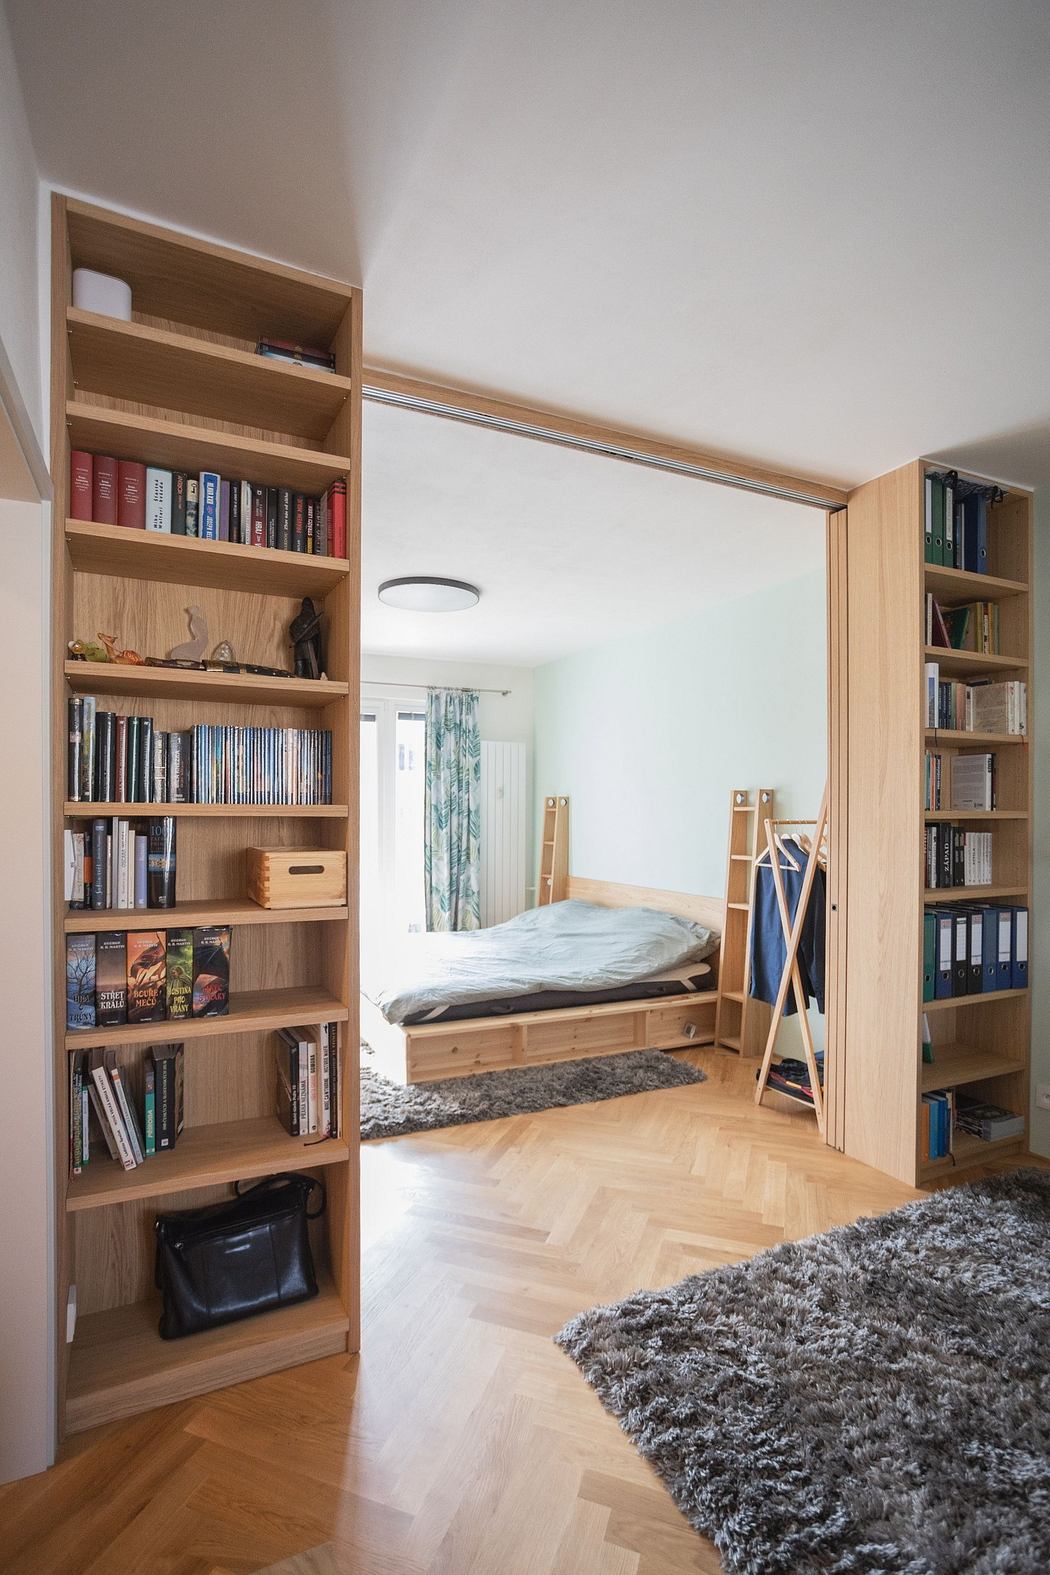 Modern bedroom with bookshelves, wood flooring, and a gray rug.